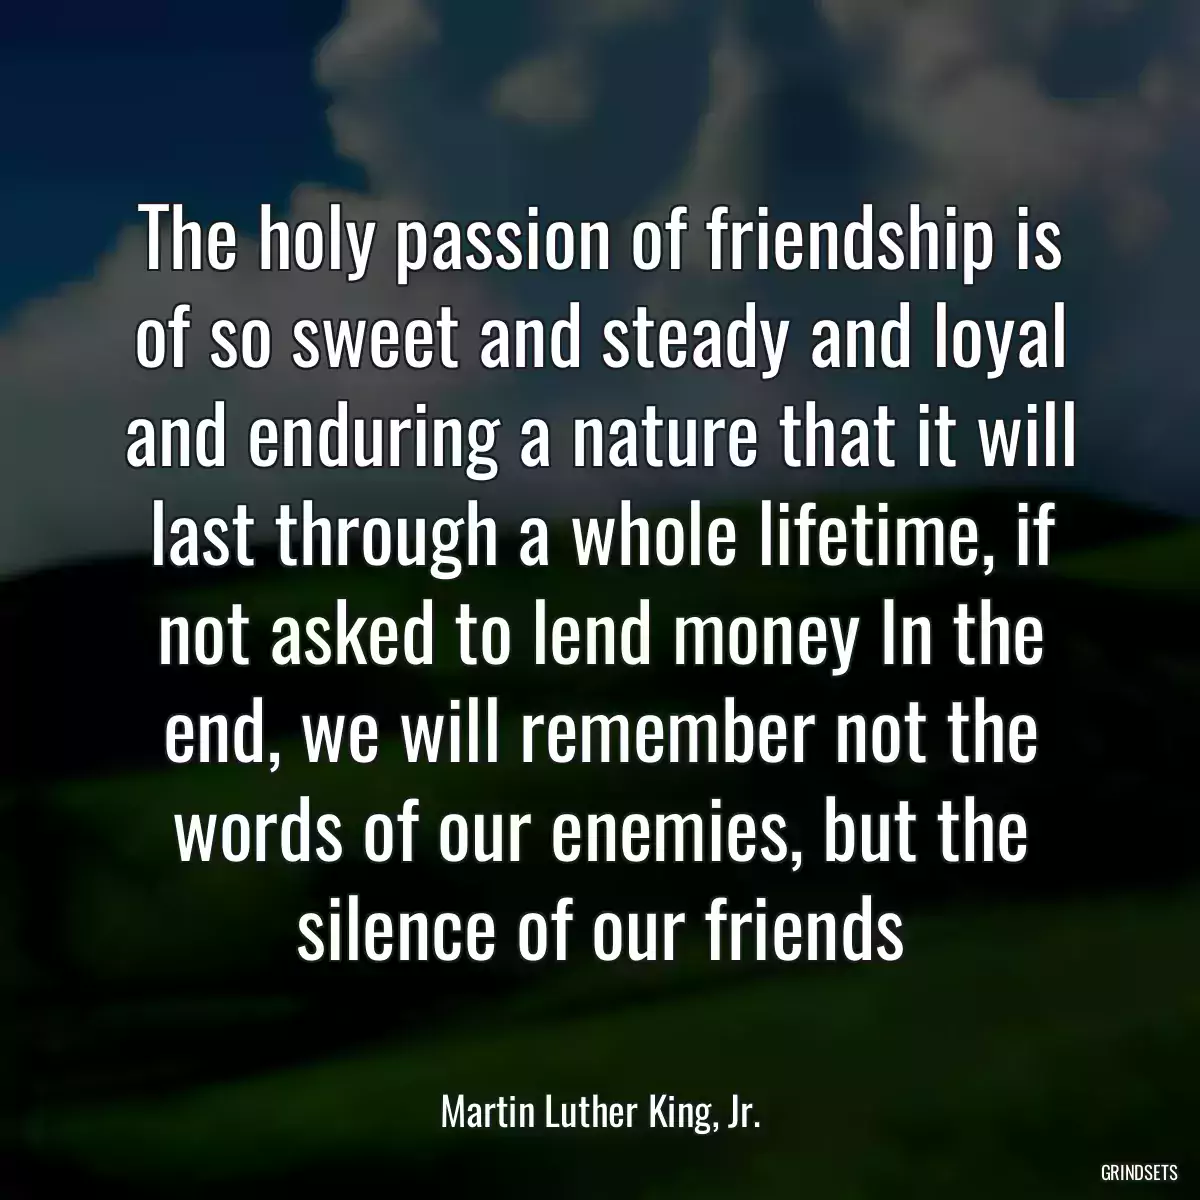 The holy passion of friendship is of so sweet and steady and loyal and enduring a nature that it will last through a whole lifetime, if not asked to lend money In the end, we will remember not the words of our enemies, but the silence of our friends